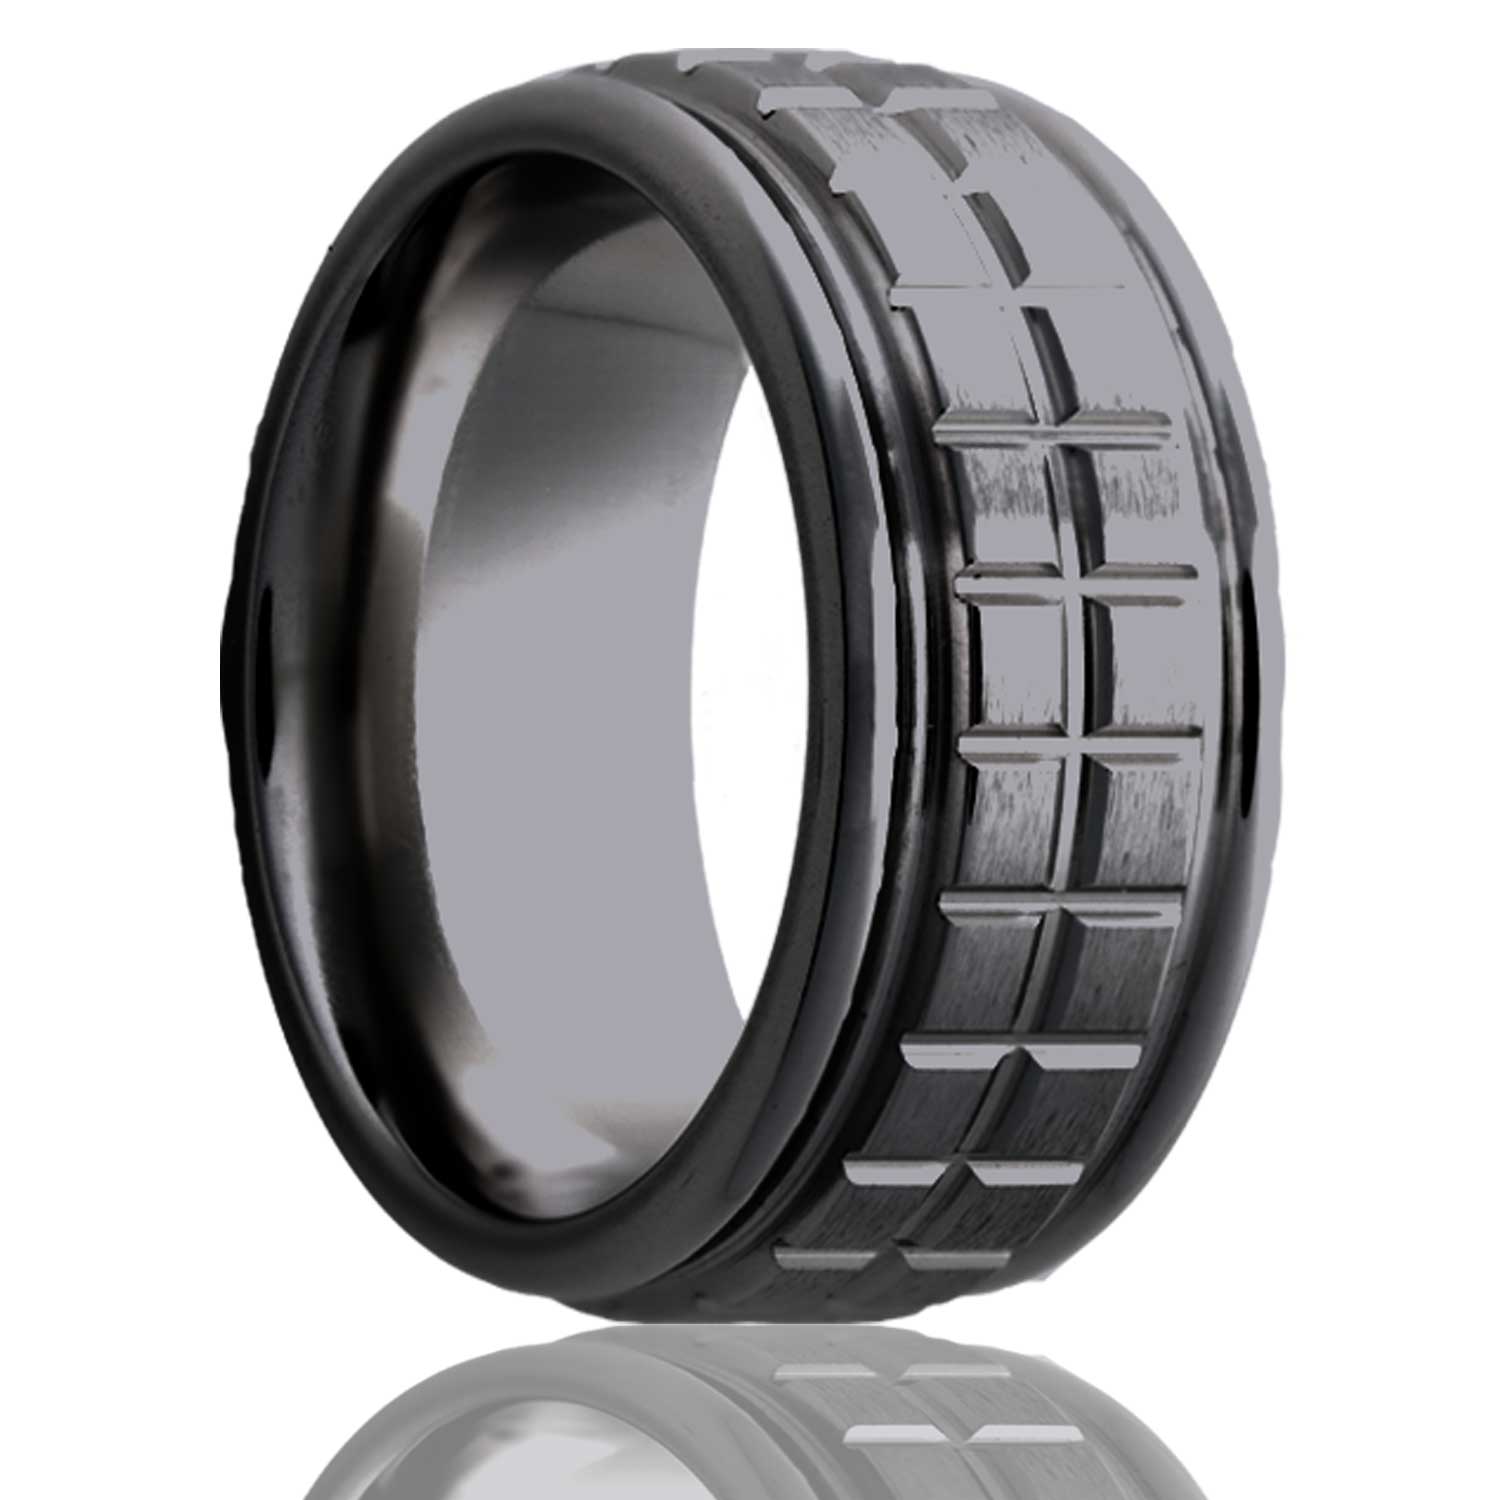 A grooved check pattern satin finish grooved zirconium men's wedding band displayed on a neutral white background.